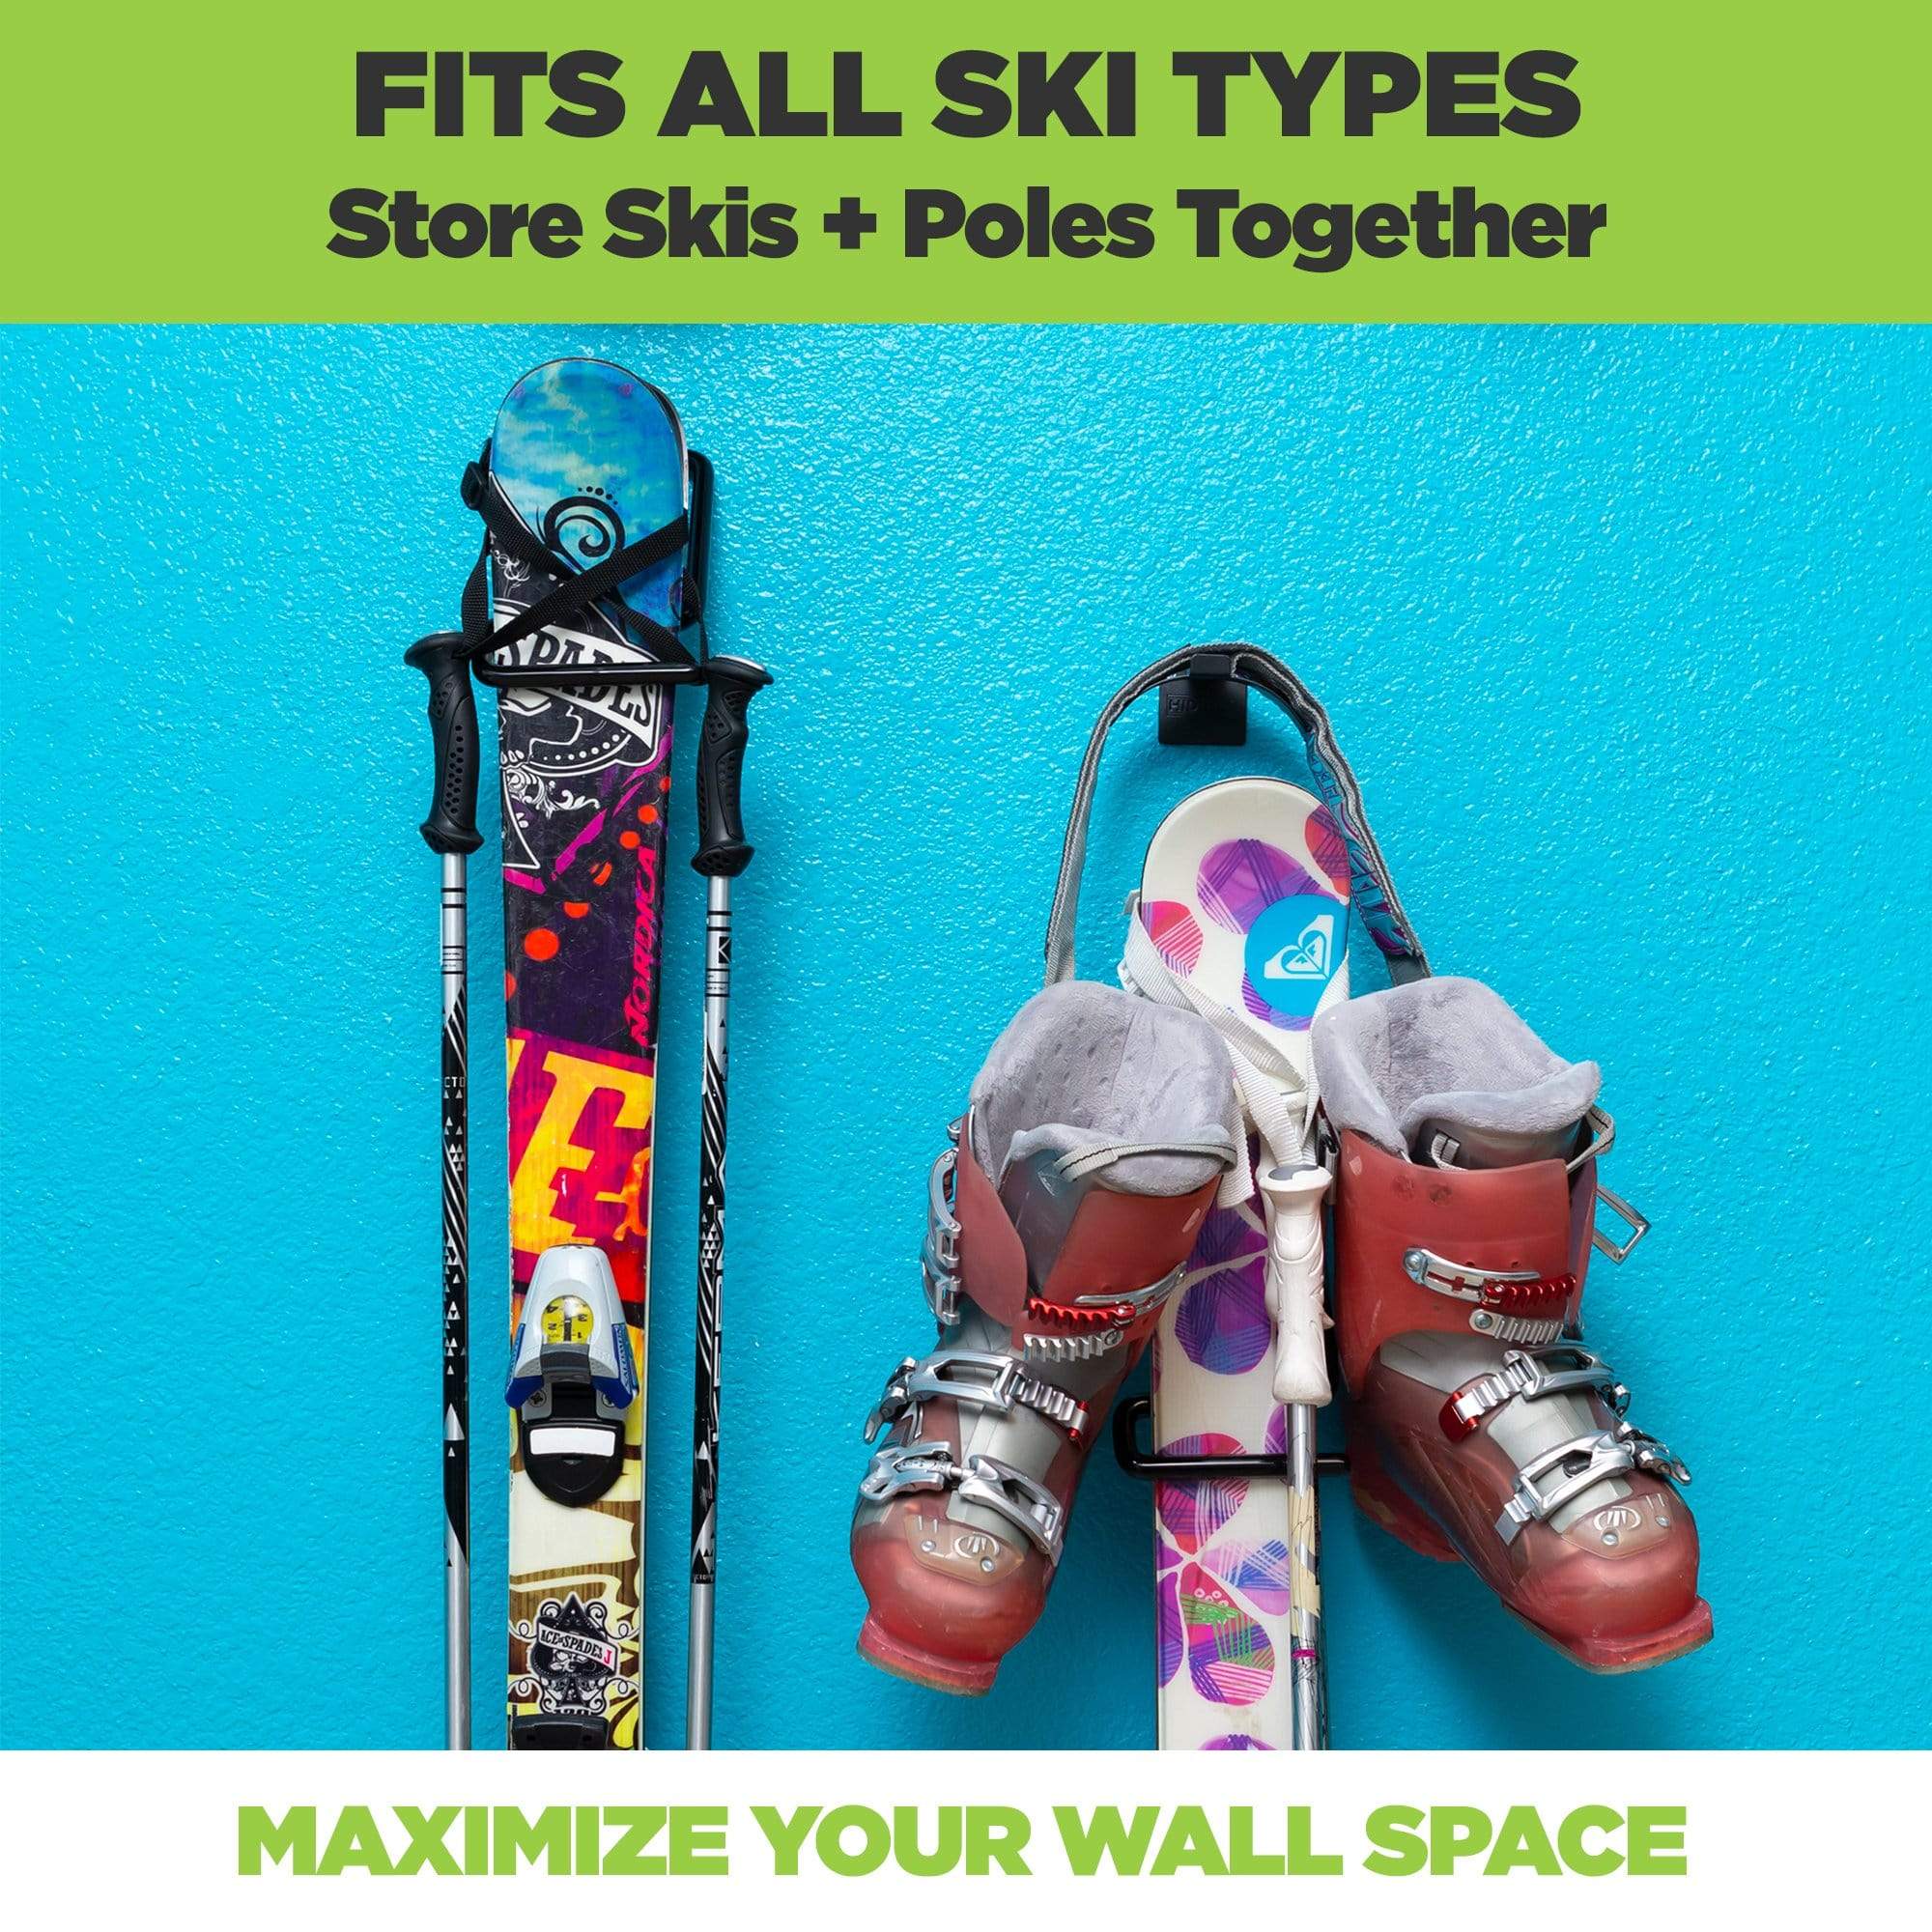 HIDEit VSki Mount can also hold ski poles and ski boots making it the perfect garage storage solution!